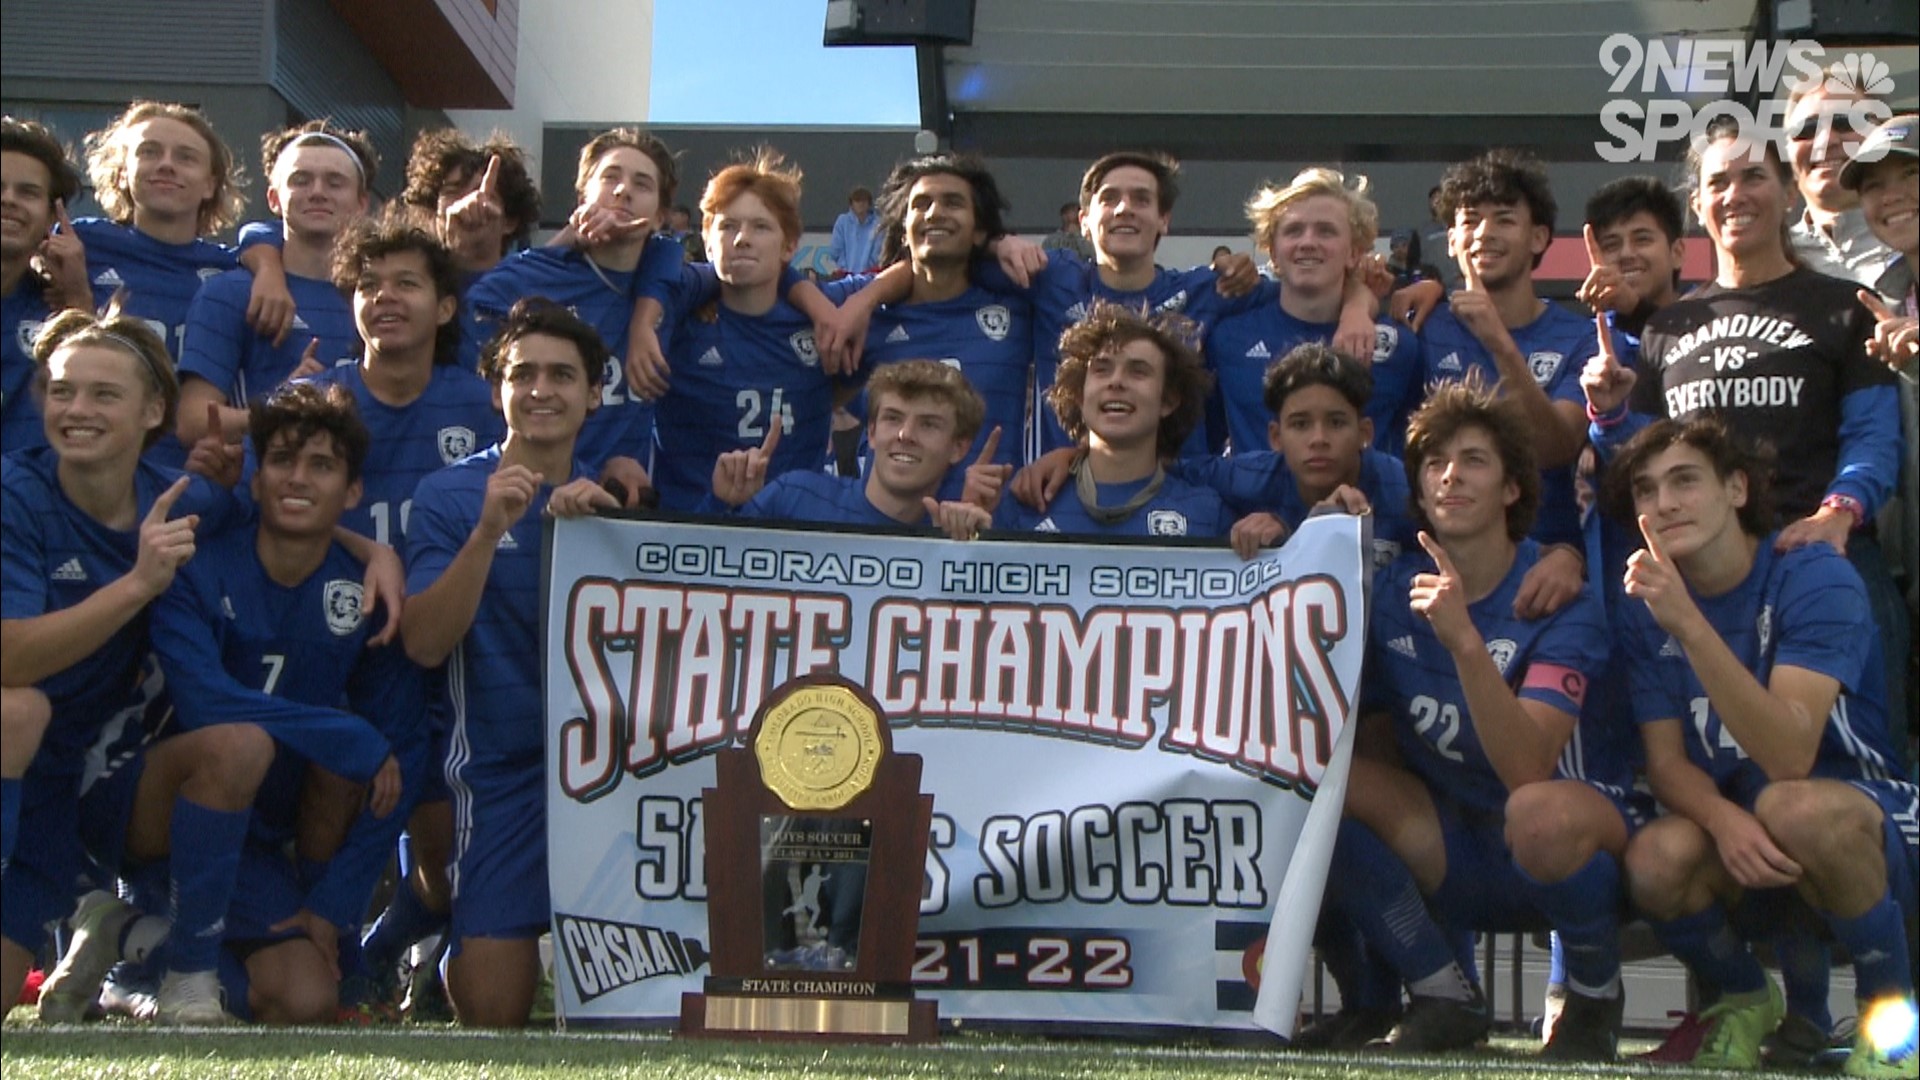 The Wolves defeated the Sabercats 3-1 on Saturday afternoon at Weidner Field to claim the Class 5A championship.